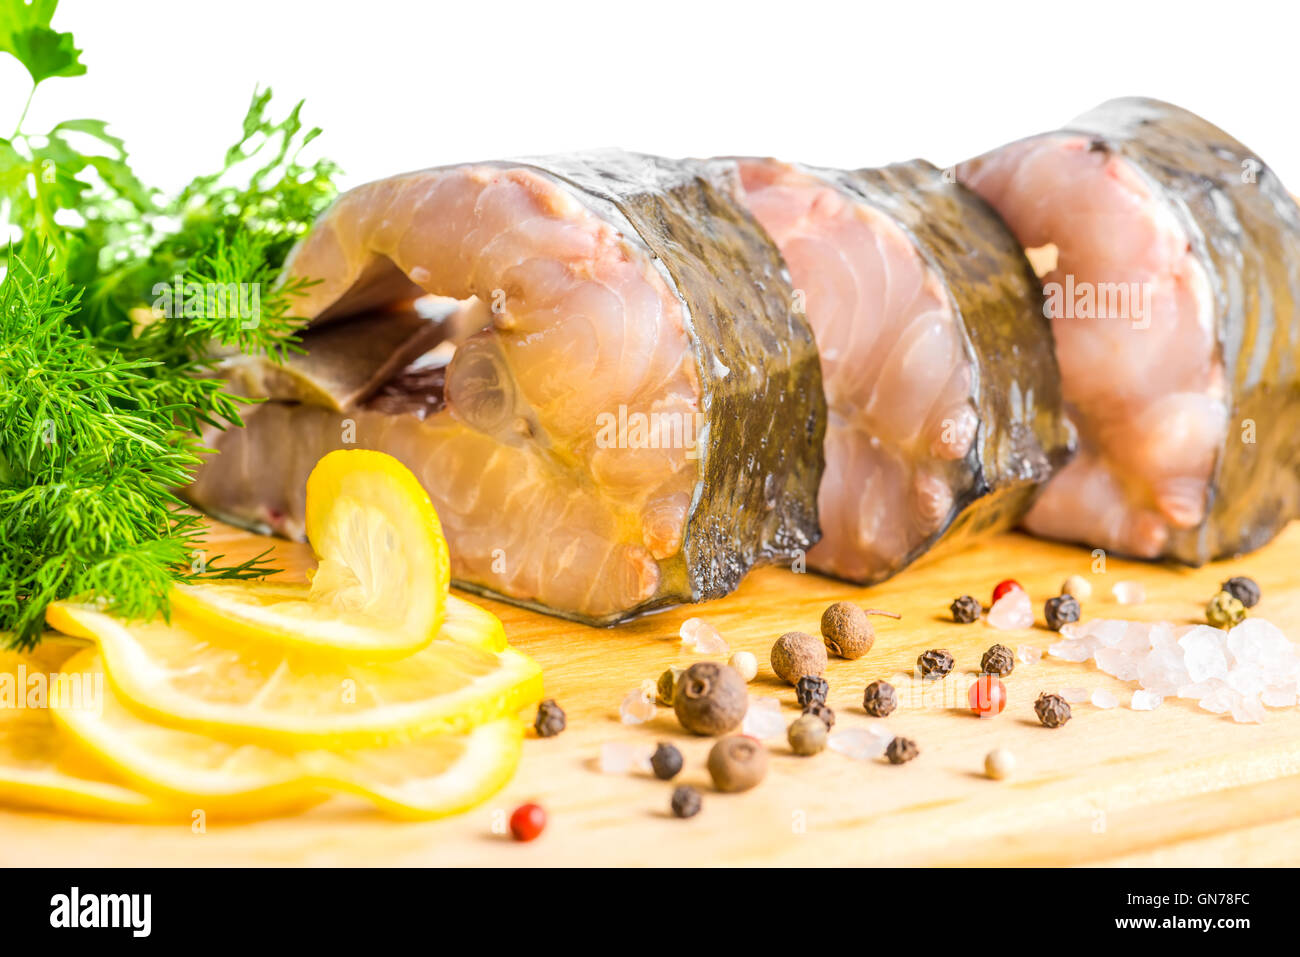 raw fillet steak of sturgeon fish with greens, lemon, different peppers and salt, isolated on white background, closeup Stock Photo